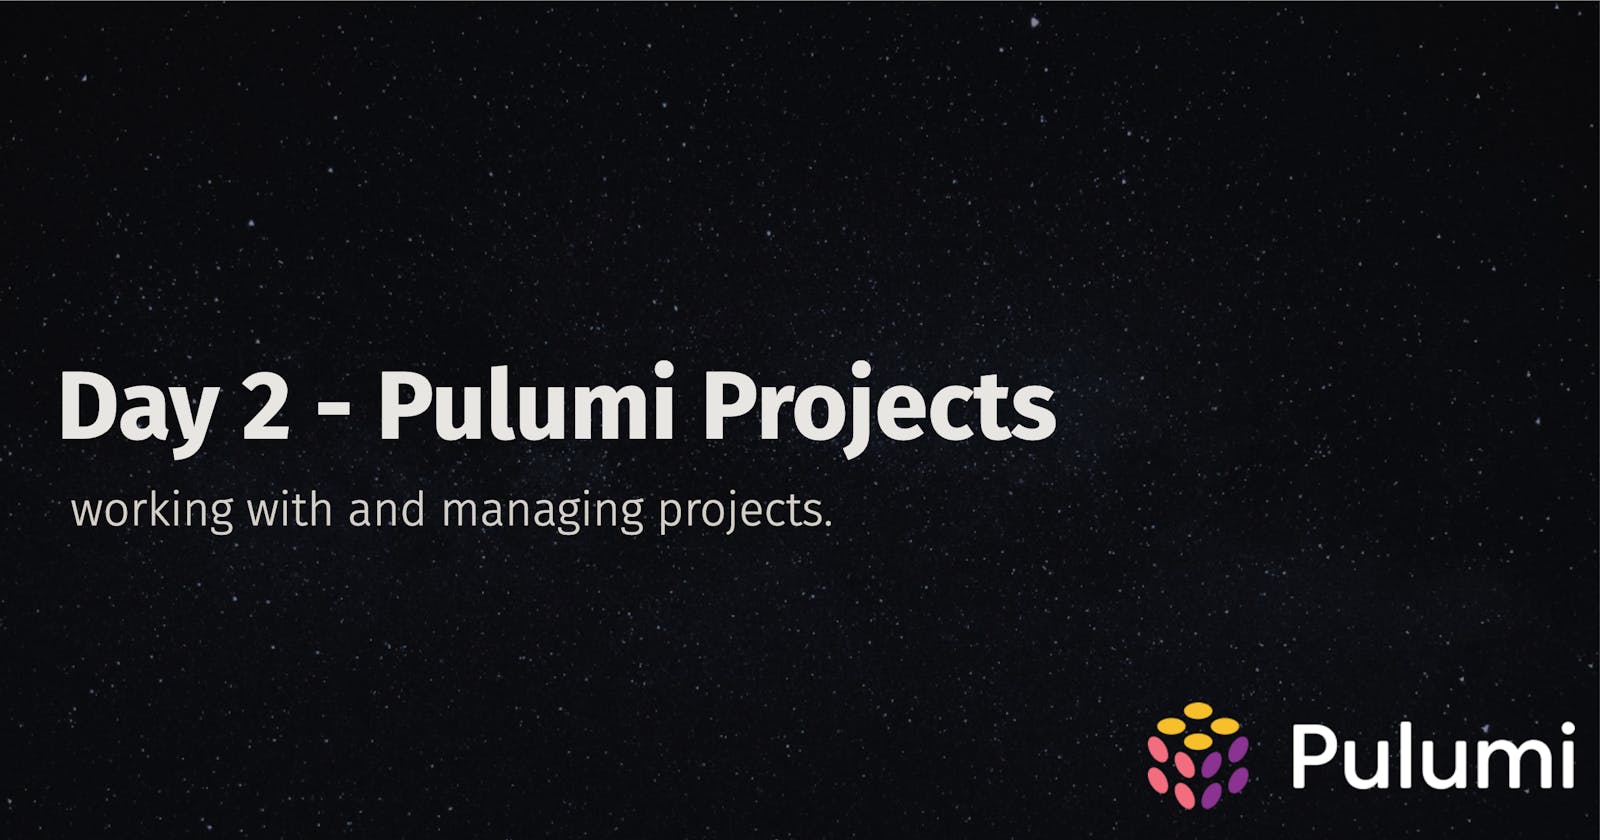 Day 2 - Pulumi Projects